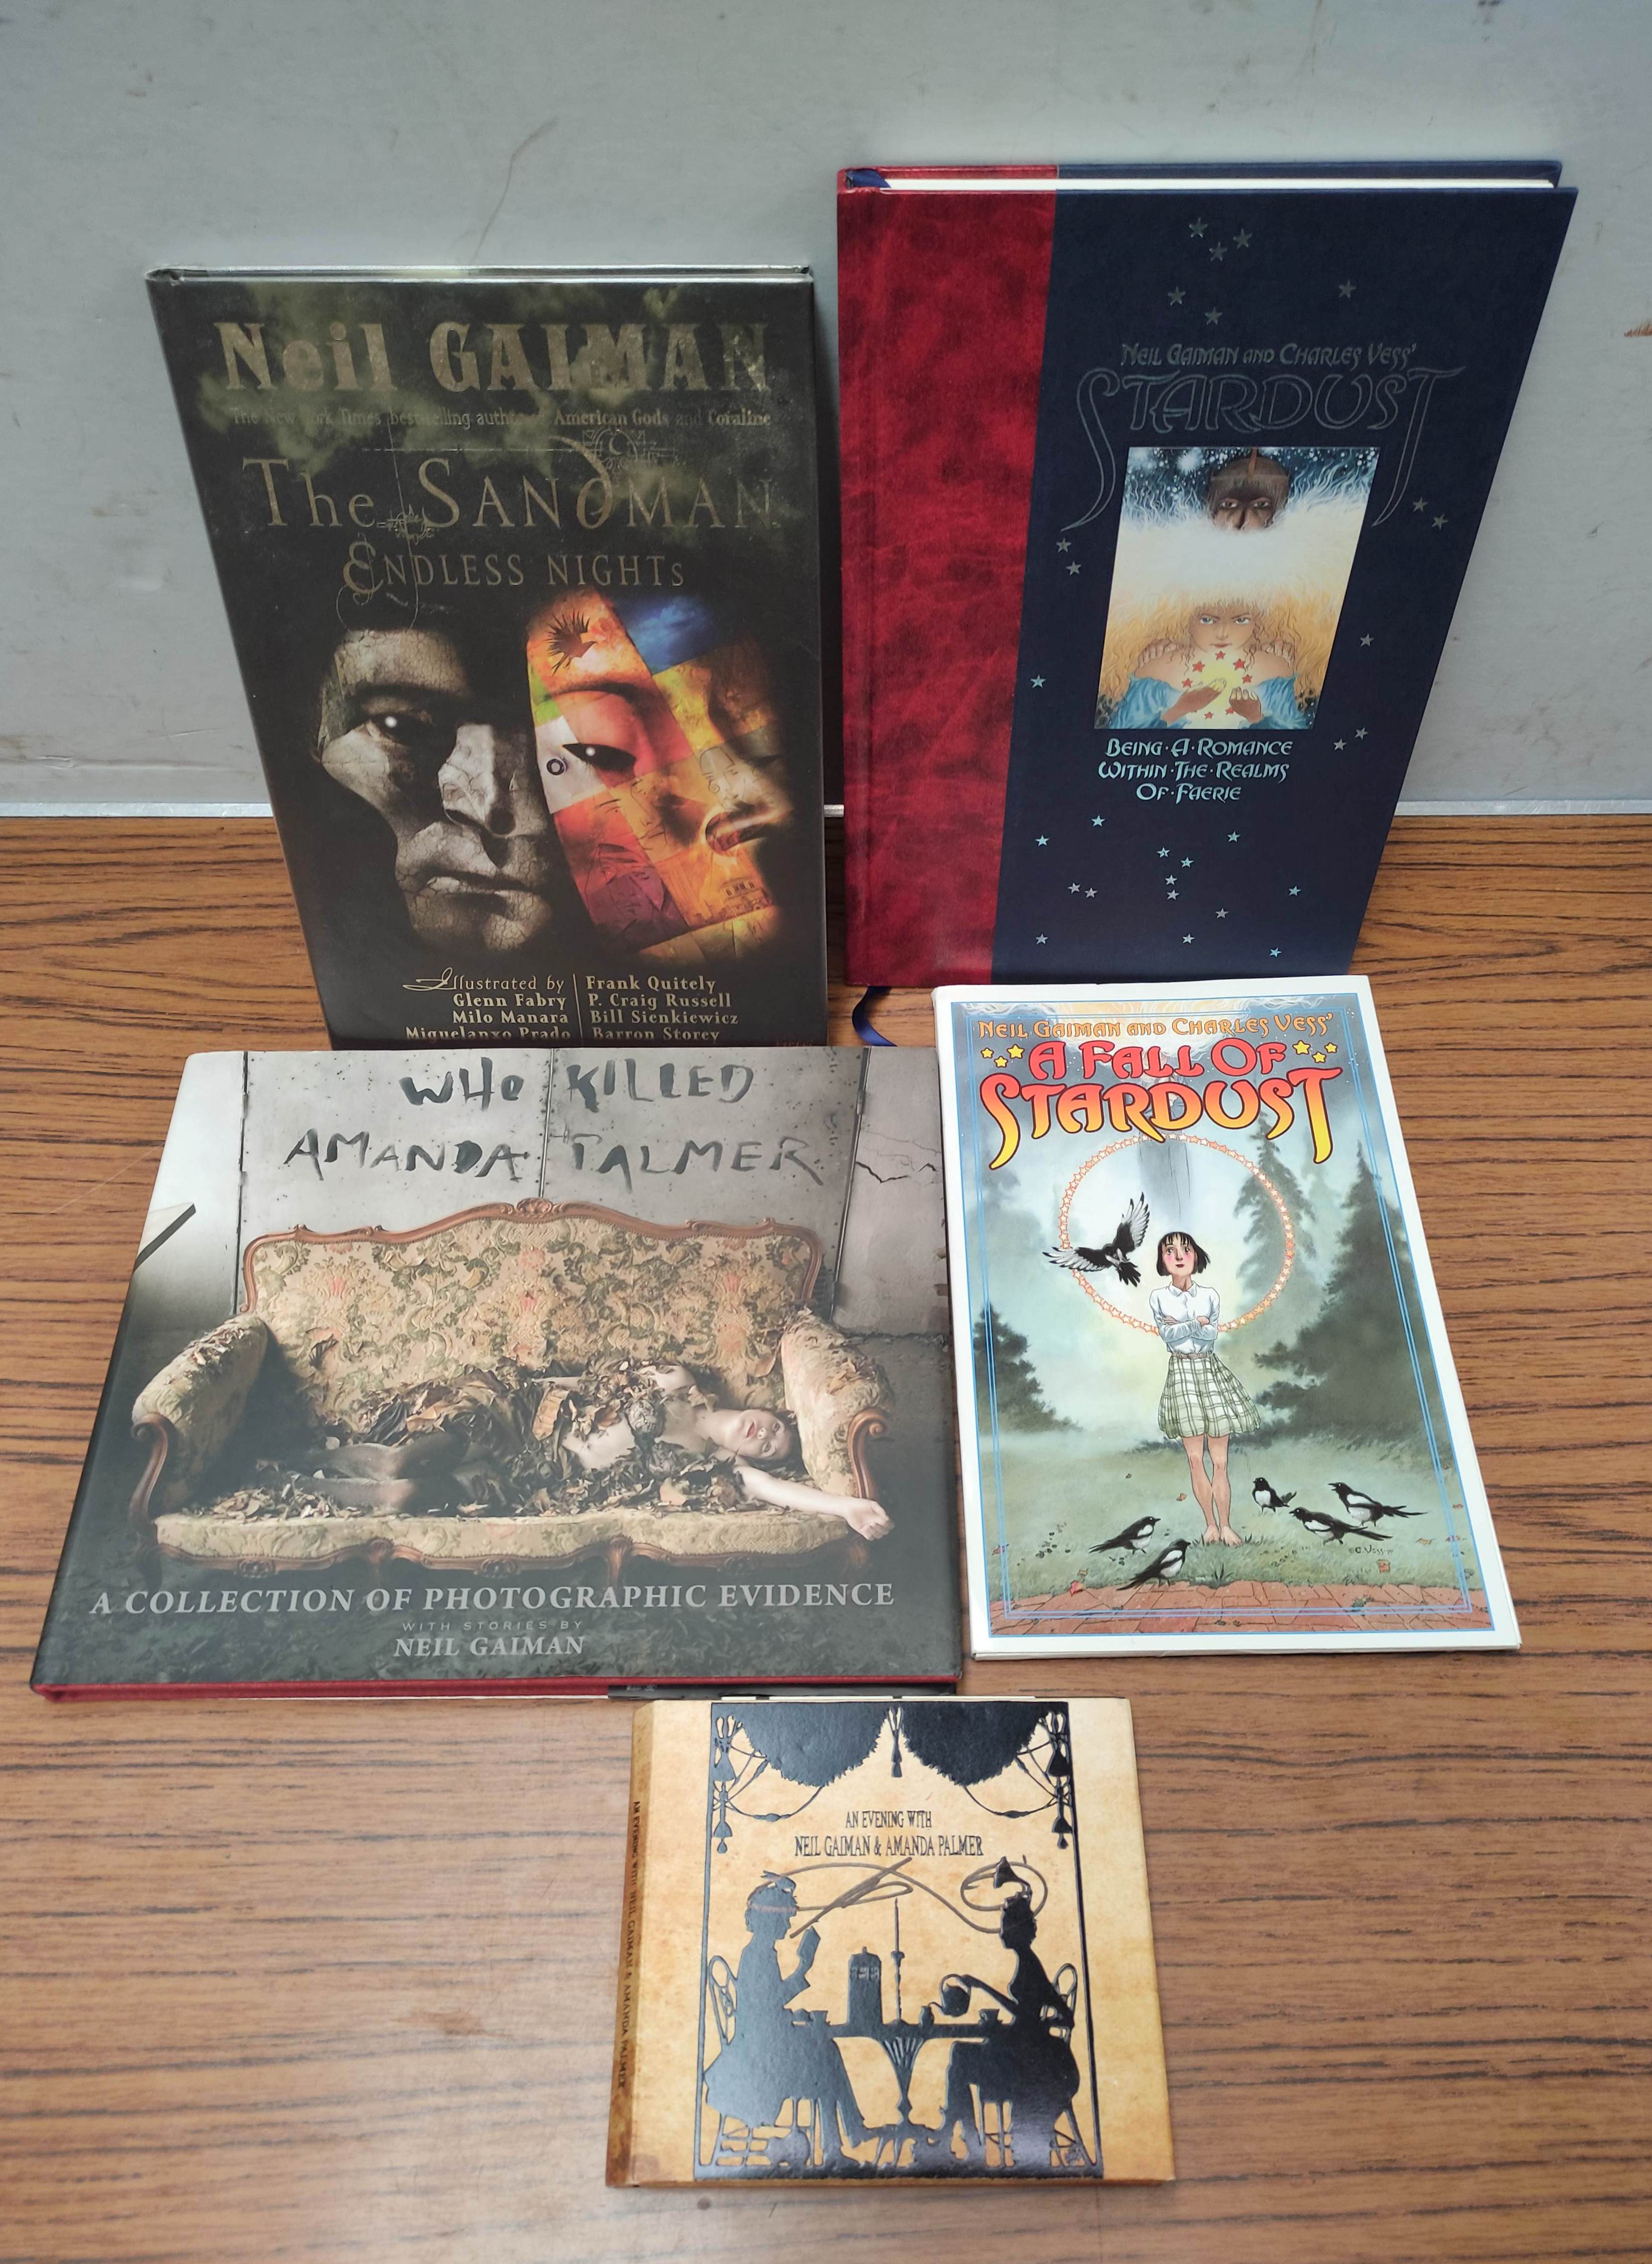 GAIMAN NEIL & VESS CHARLES.  Stardust. Signed & inscribed with sketch. Small folio. Pict. brds. N.